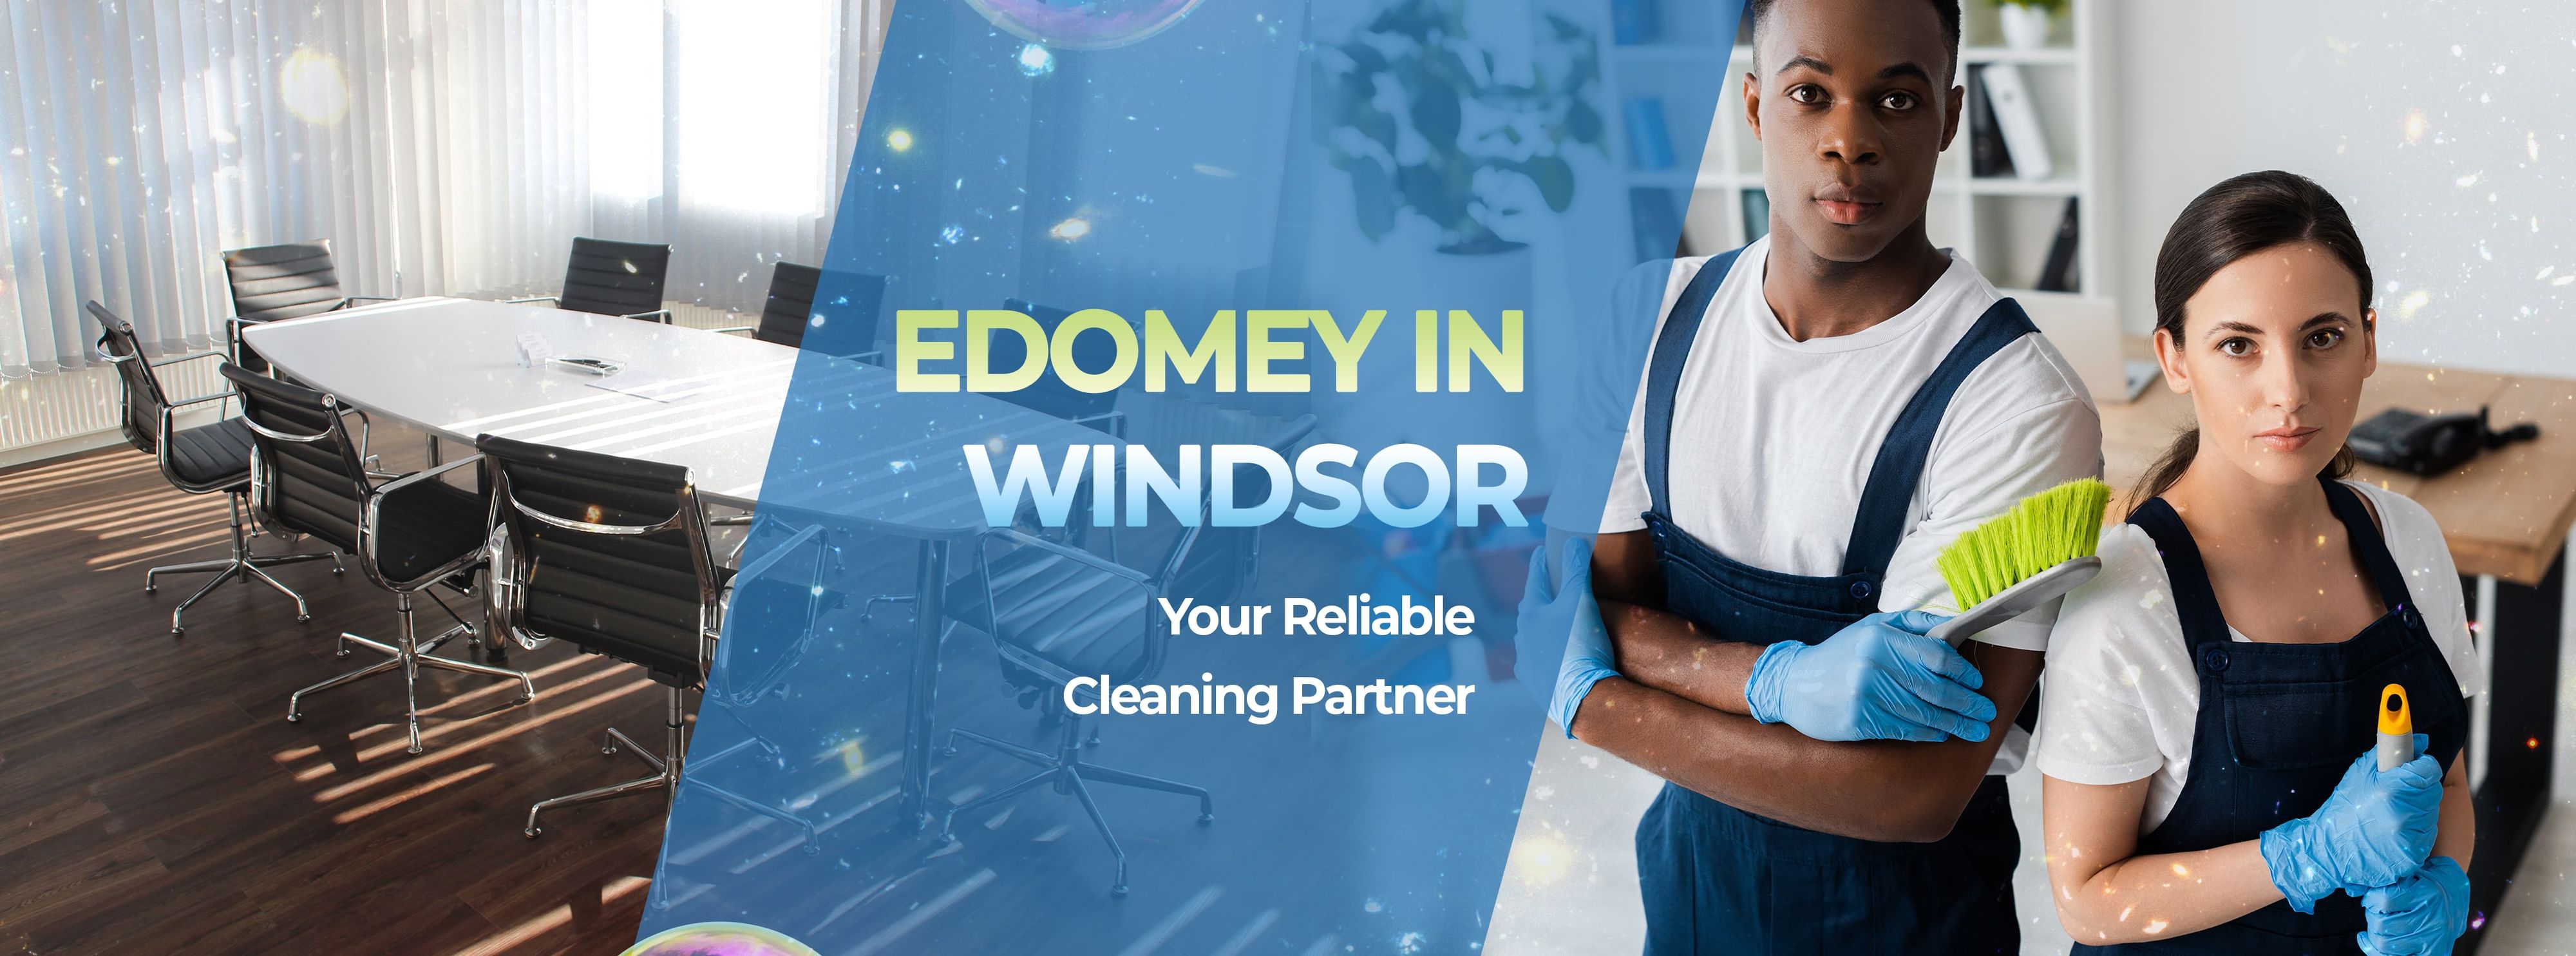 Professional Commercial Cleaning Services in Windsor, ON